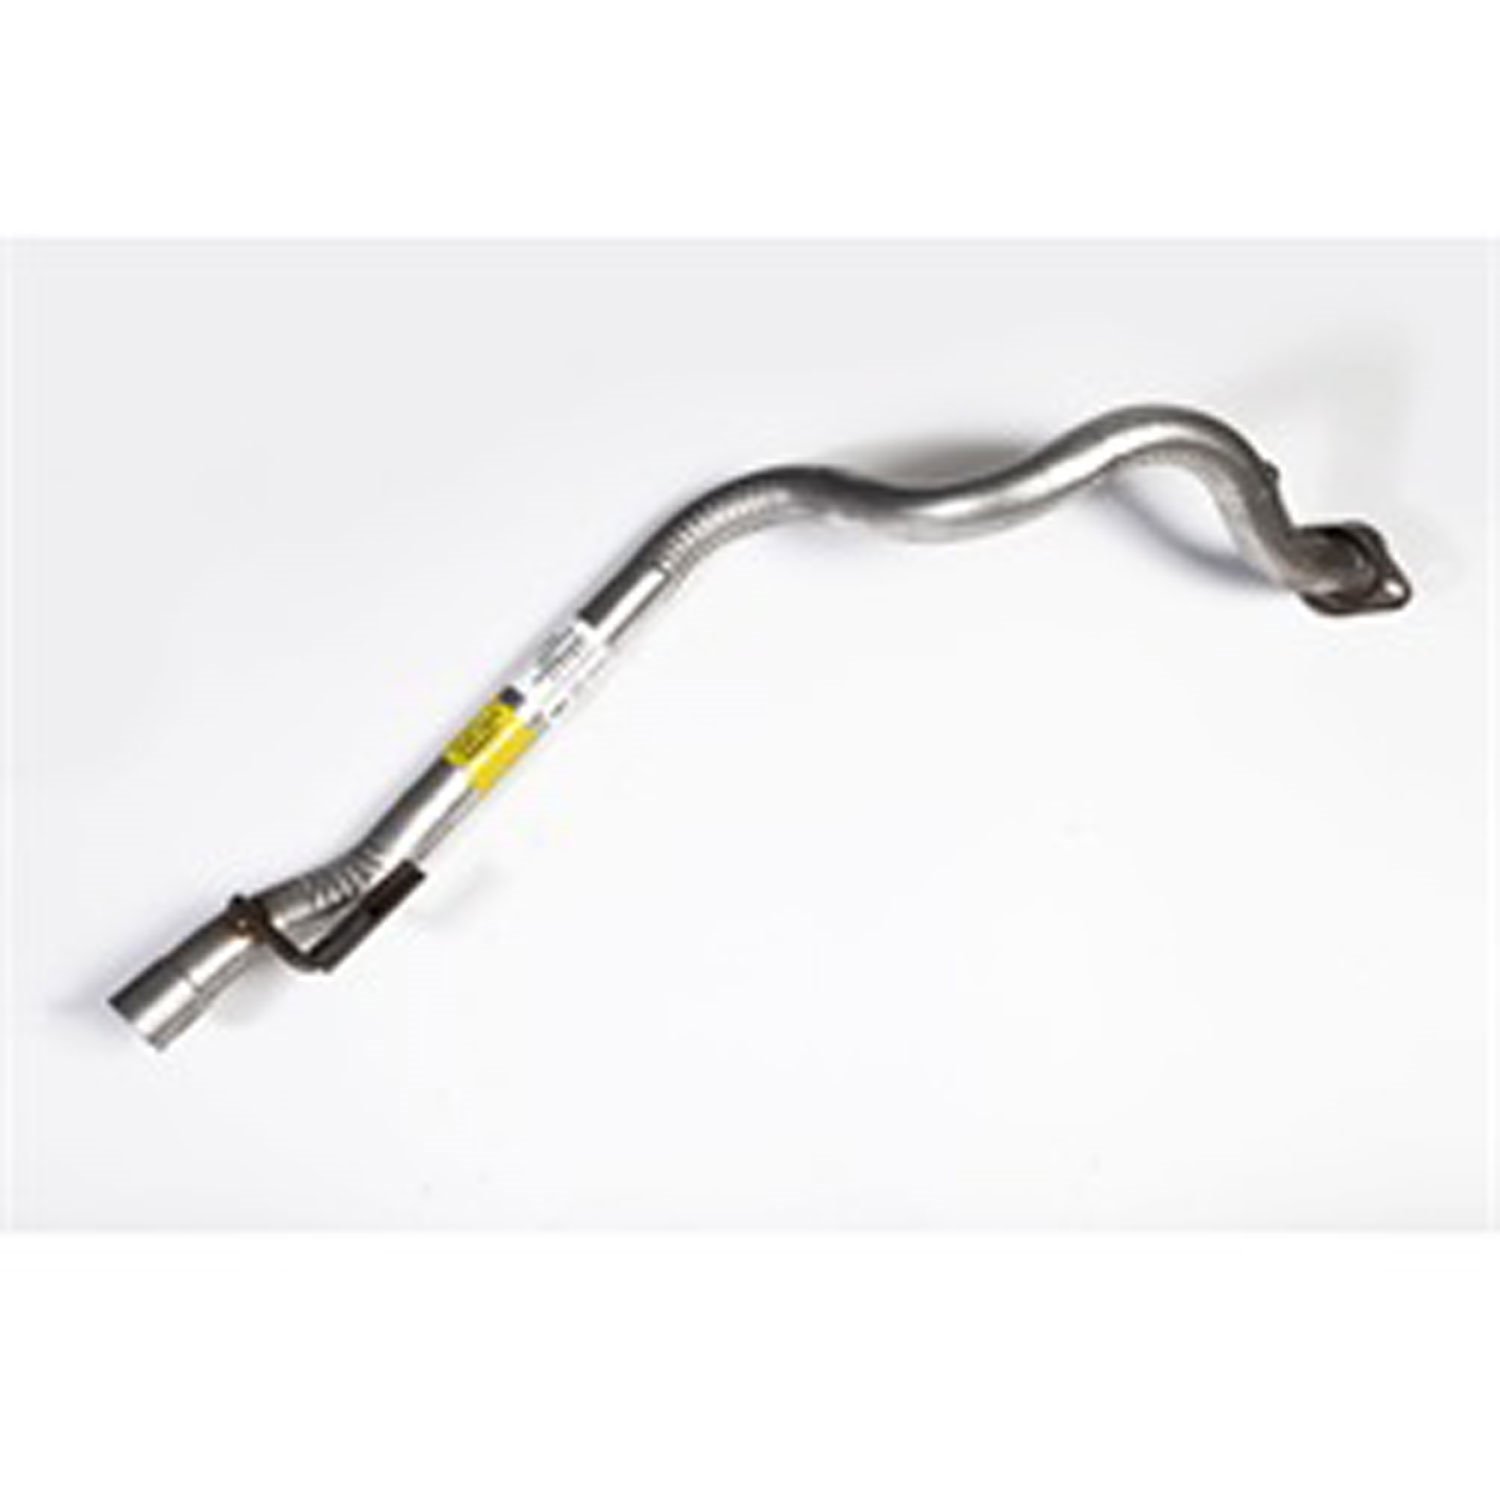 This exhaust head pipe from Omix-ADA fits 93-95 Jeep Cherokees with a 4.0L engine.